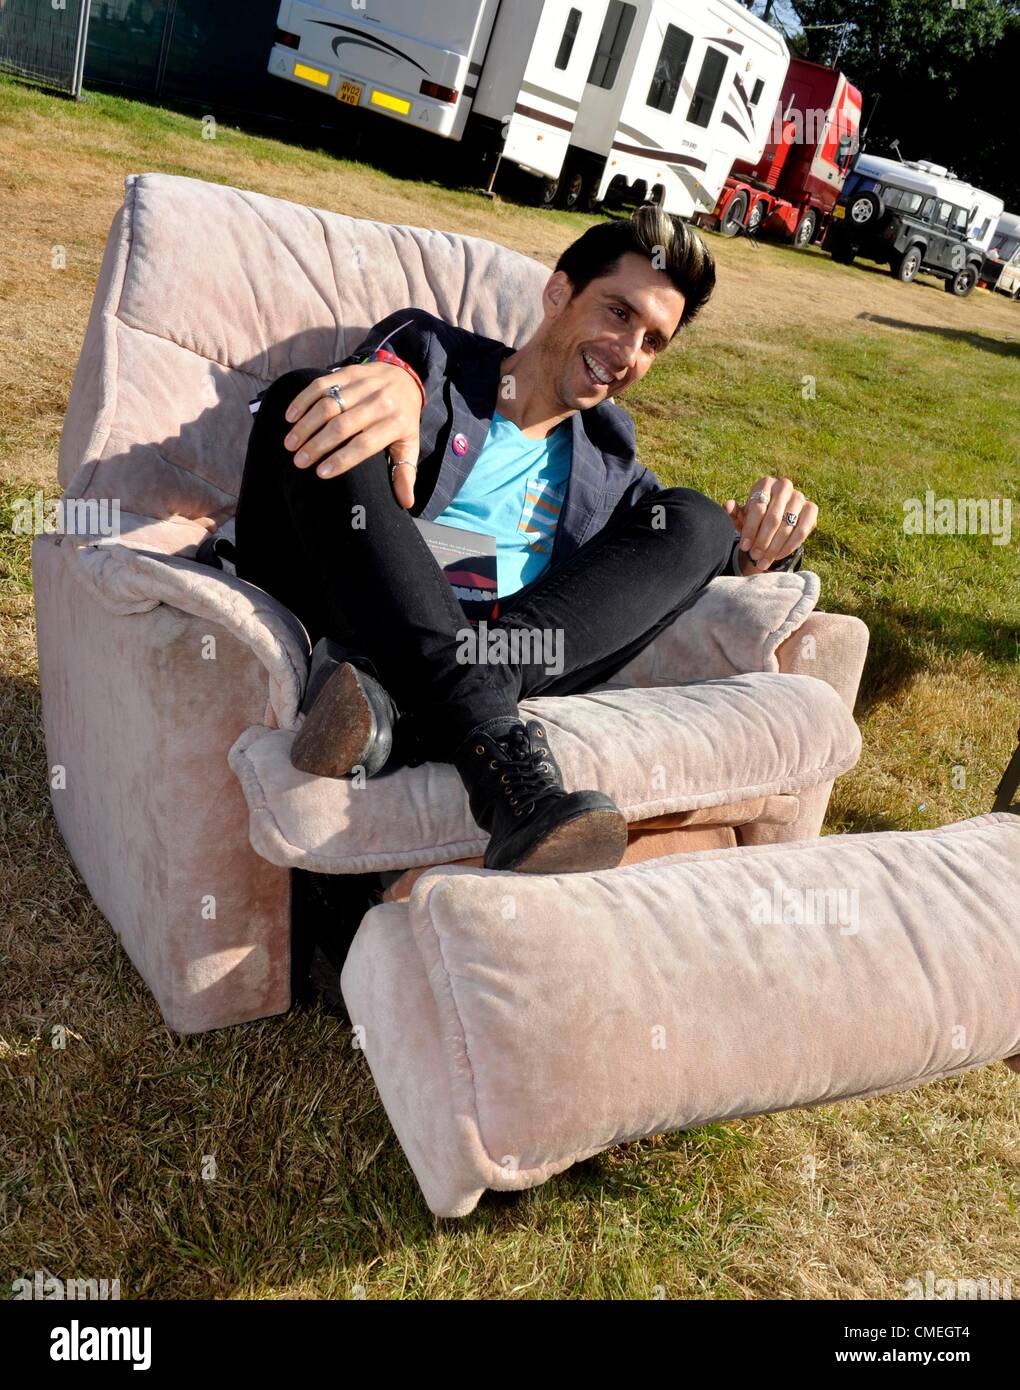 Russell kane backstage a camp bestival Lulworth Castle dorset 27,07/2012 Foto Stock